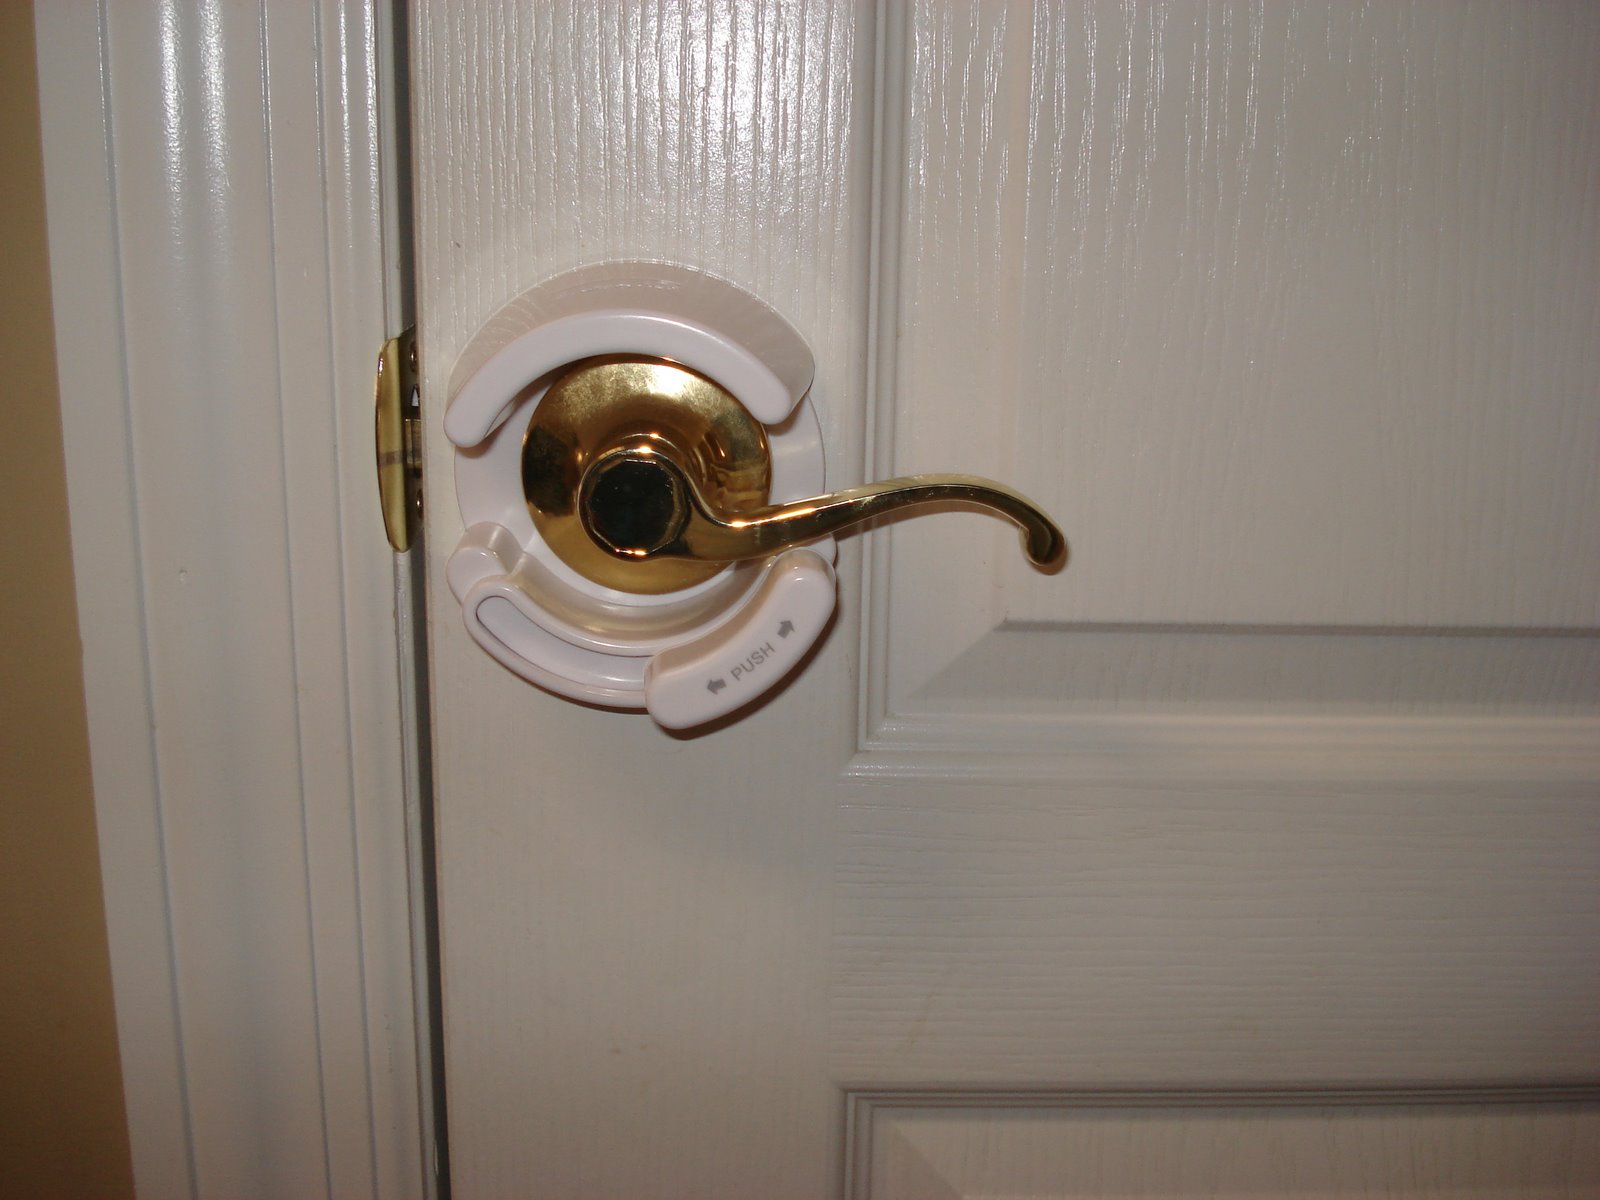 child safety door knob covers photo - 19